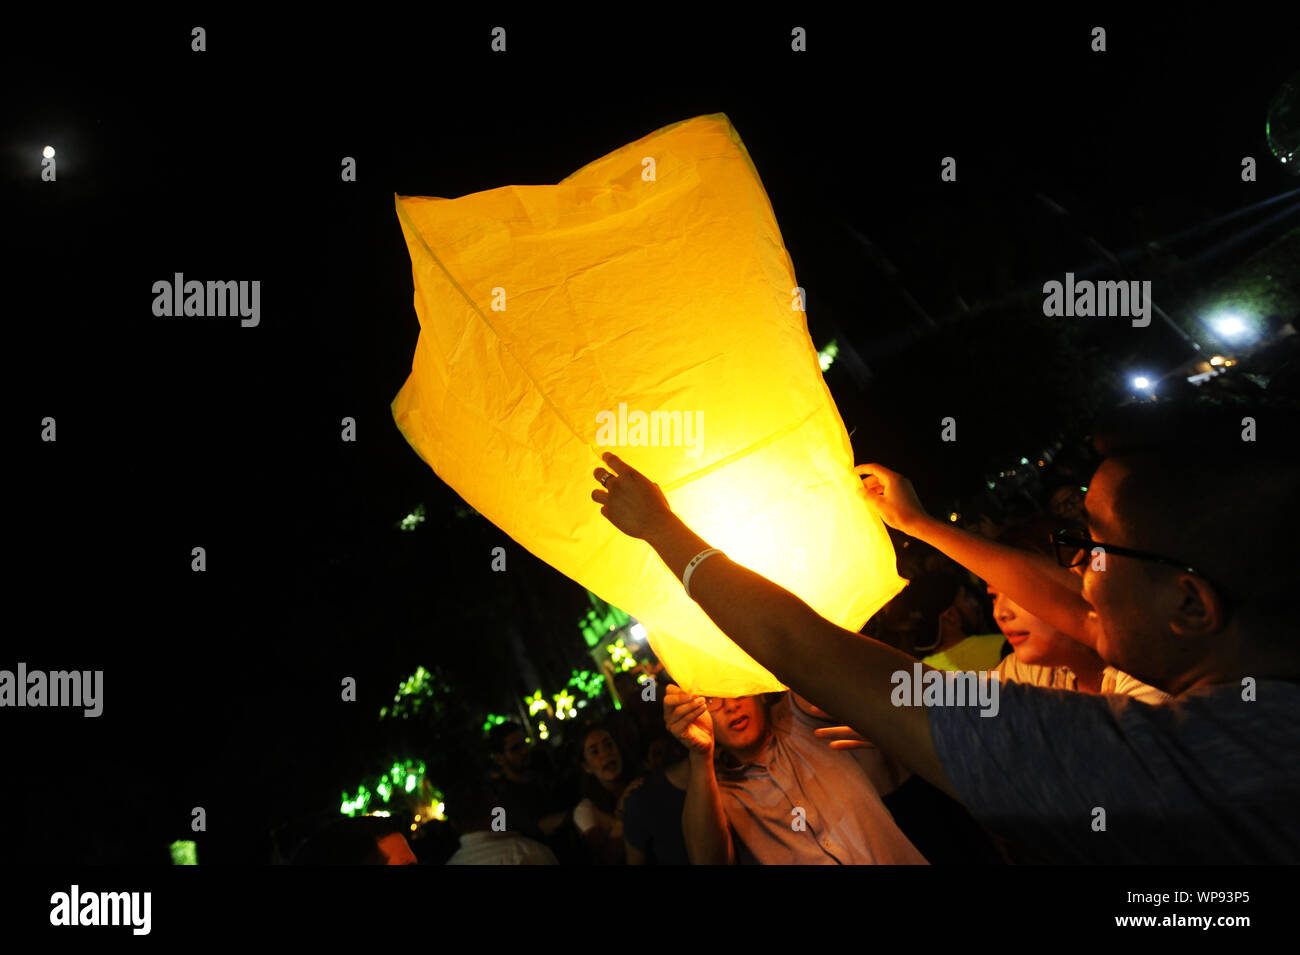 Ahuachapan, El Salvador. 8th Sep, 2019. People lift hot air ballons. In the town of Ahuachapan, people come together to celebrate the eve of the birth of Virgin Mary. For 169 years, people light the streets of Ahuachapan with lanterns, now hundreds of locals and tourist take part in this tradition. Credit: Camilo Freedman/ZUMA Wire/Alamy Live News Stock Photo